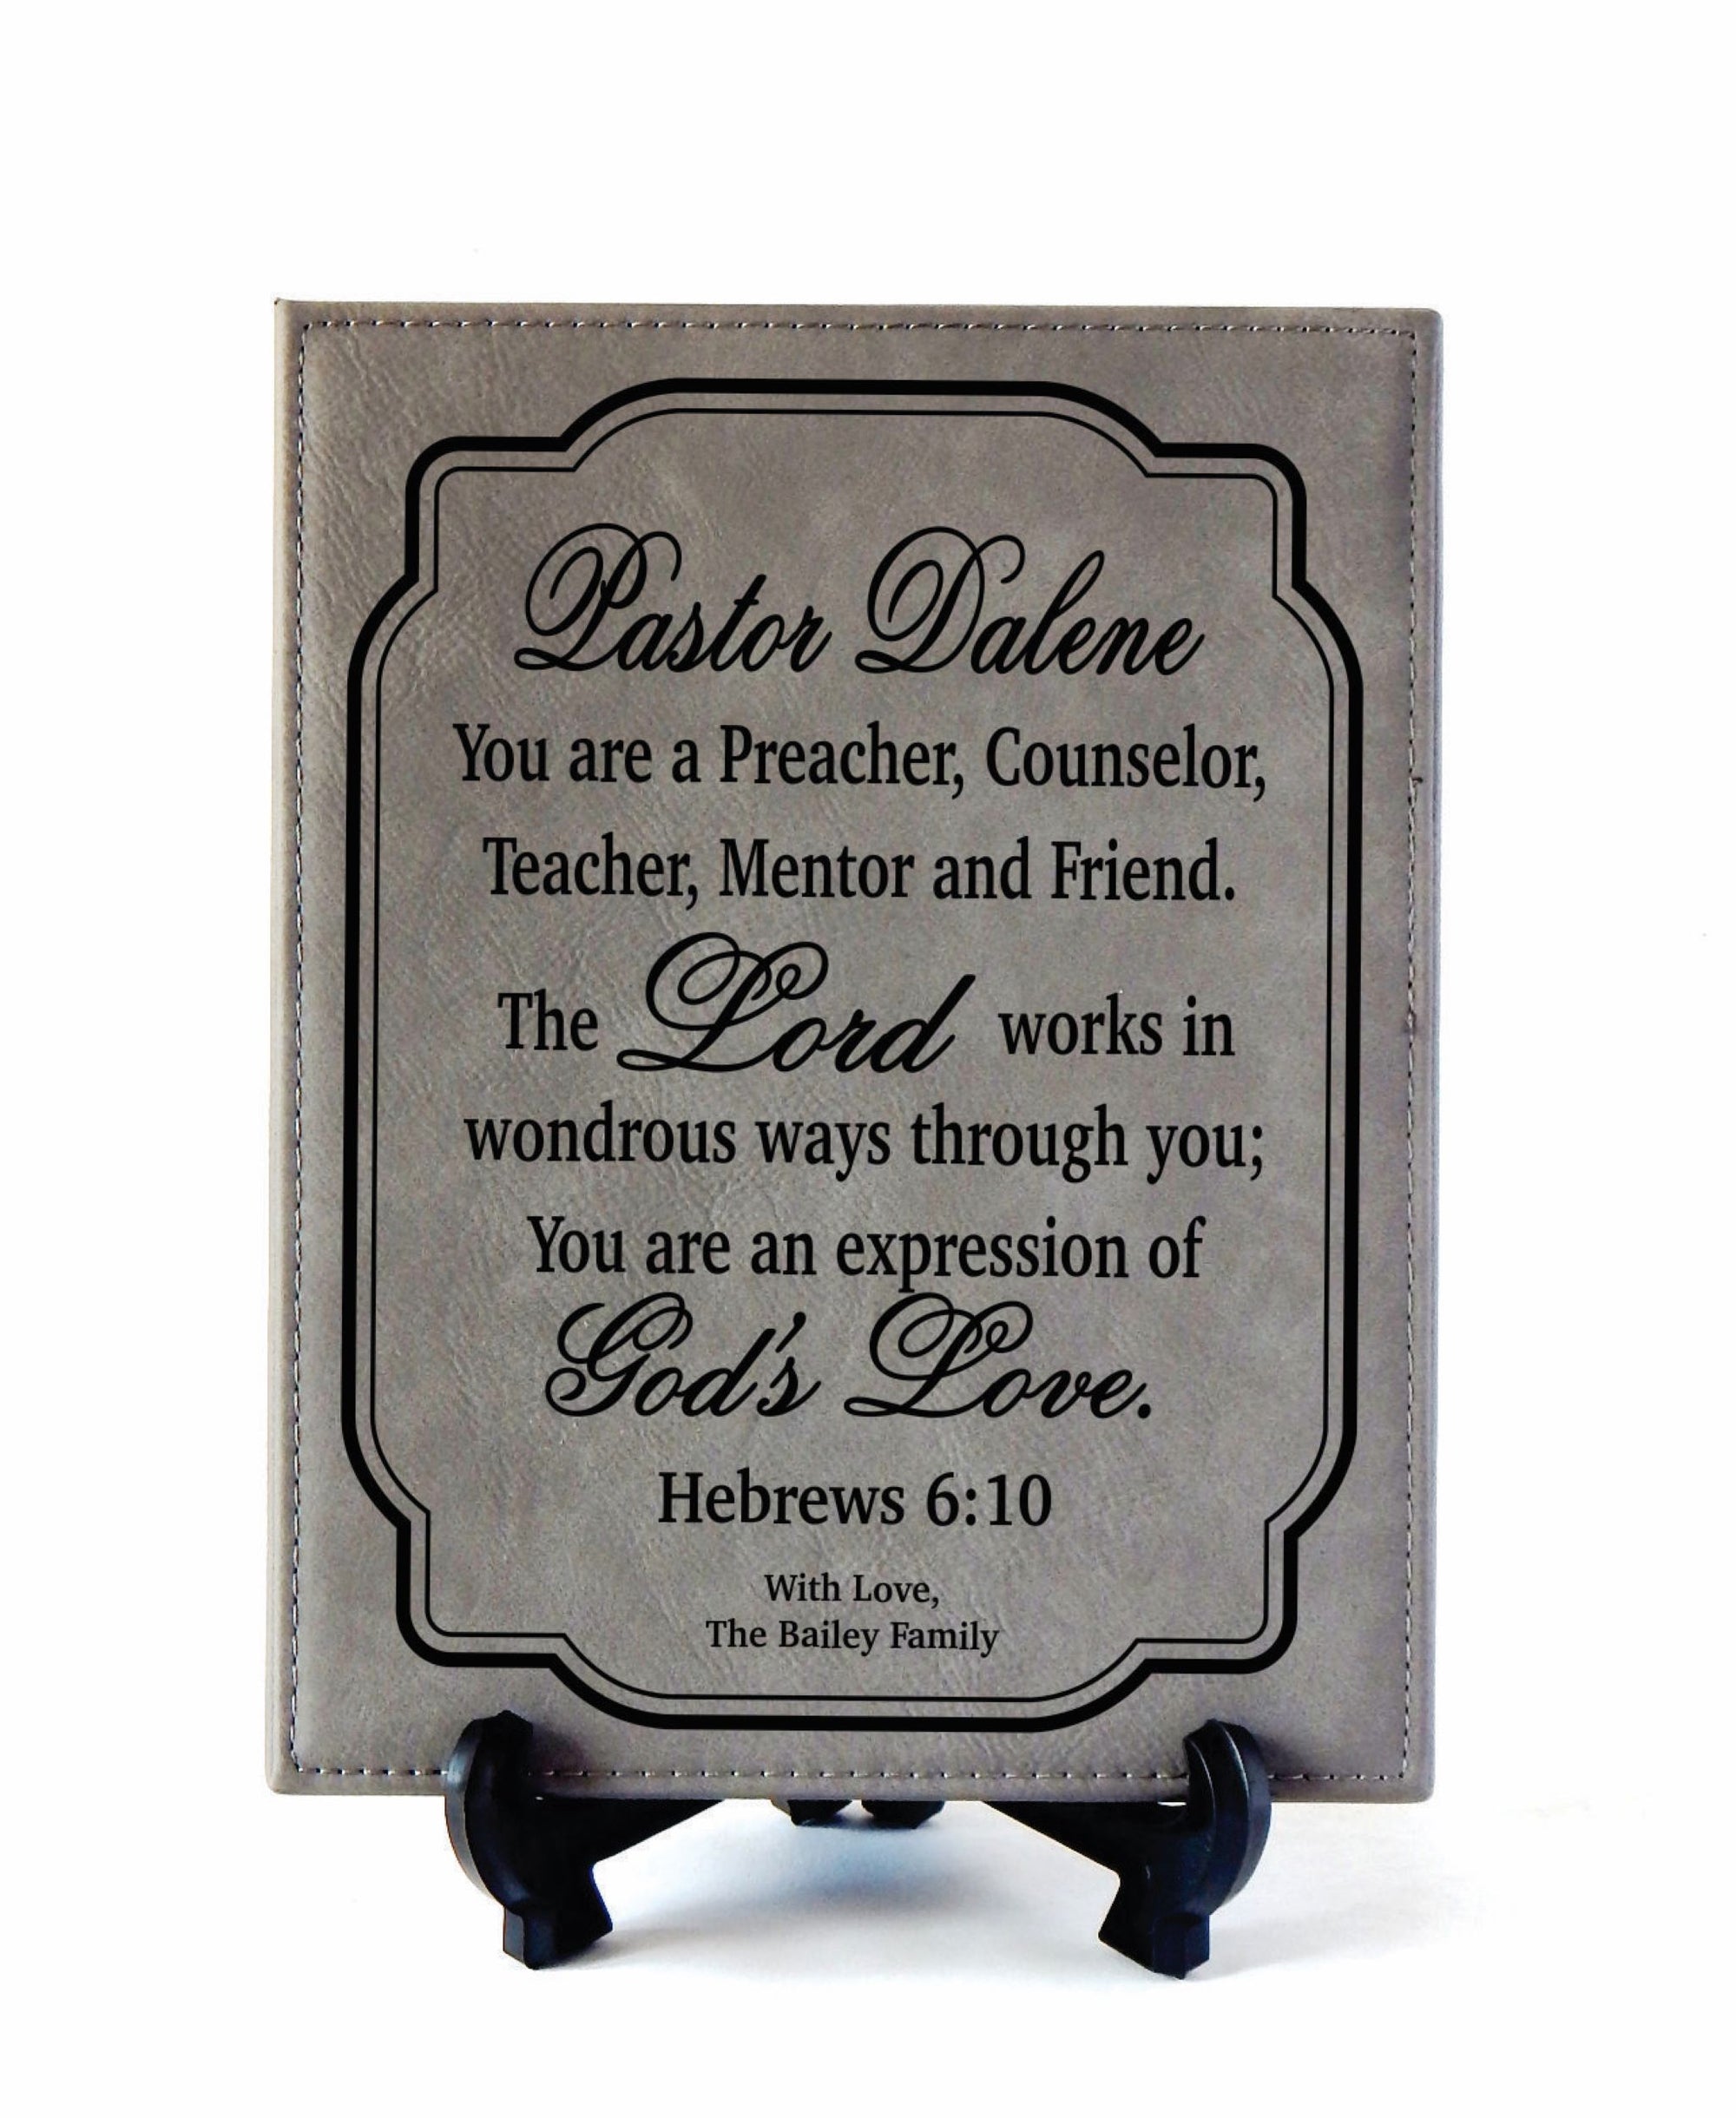 Personalized Gift for Pastor | Priest Engraved Leather Plaque